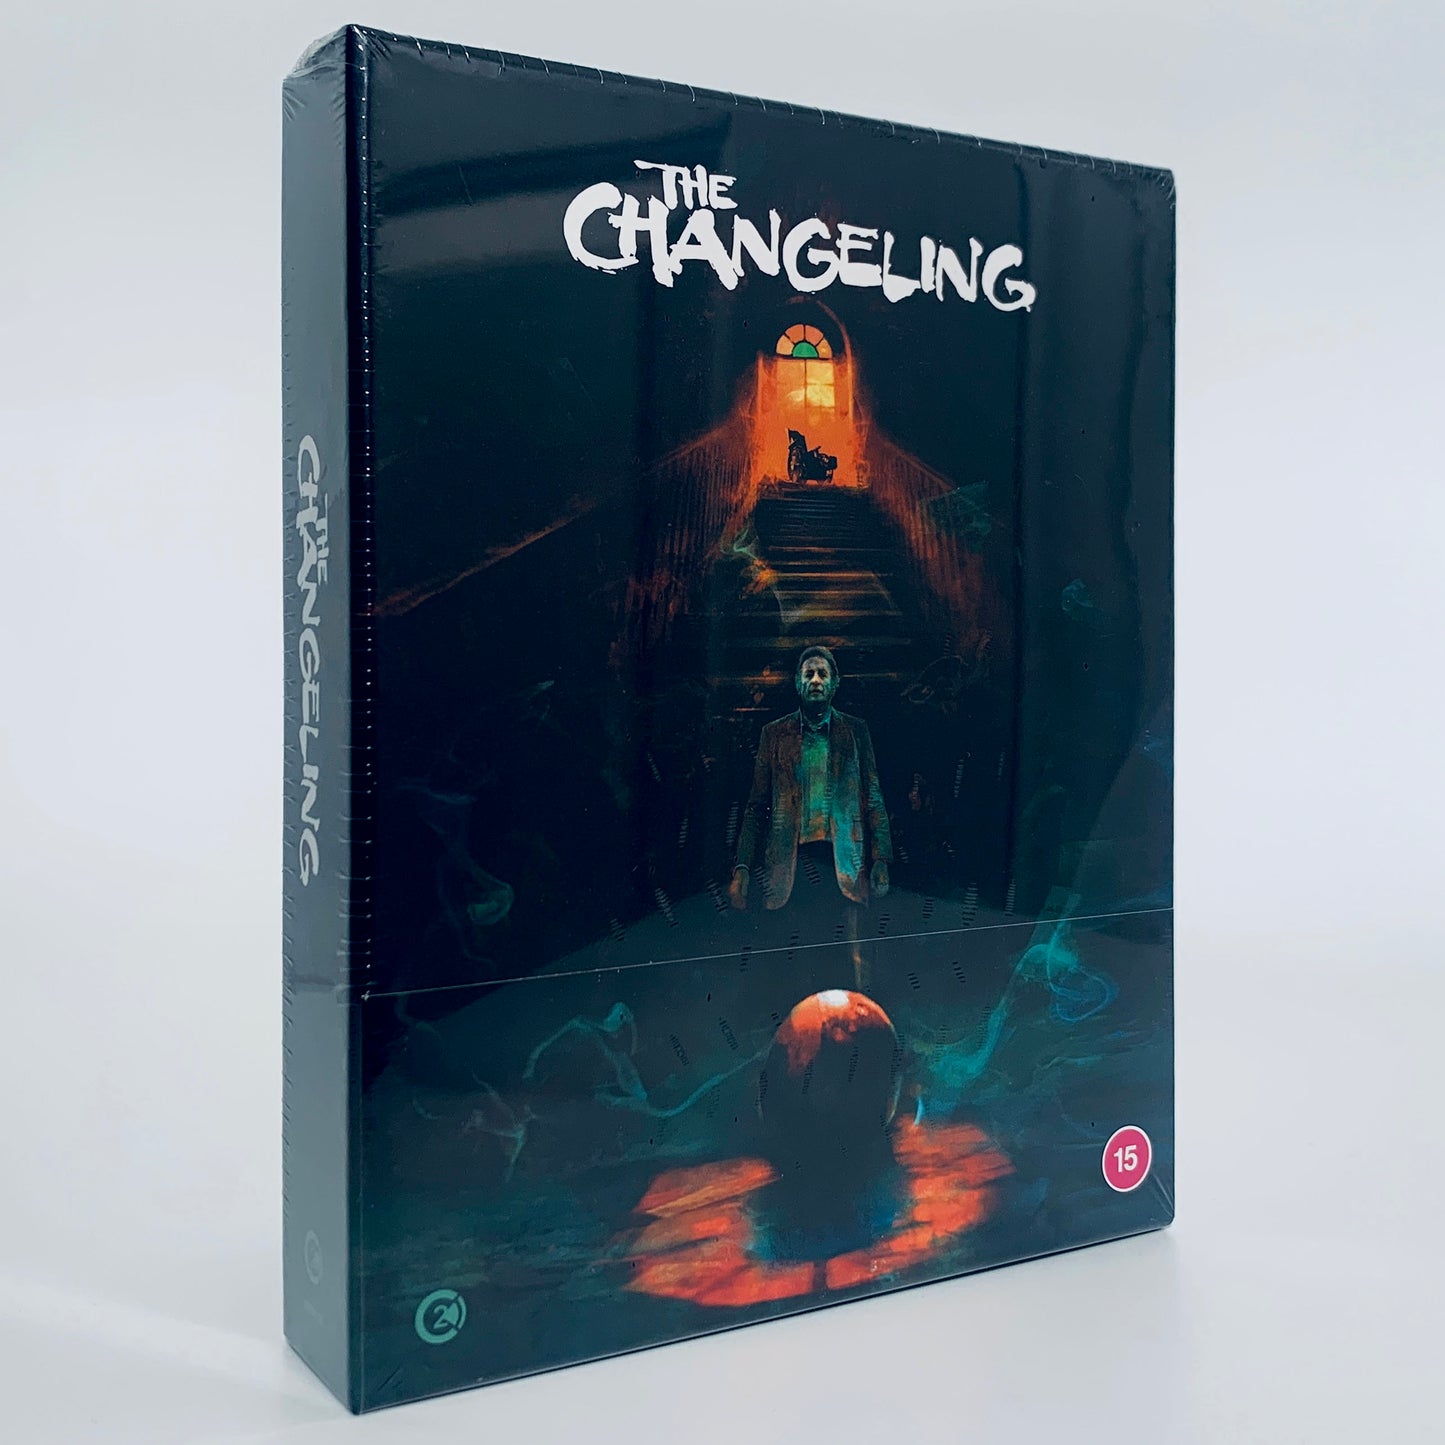 The Changeling 3-Disc 4K Ultra HD Blu-ray Second Sight Soundtrack OS